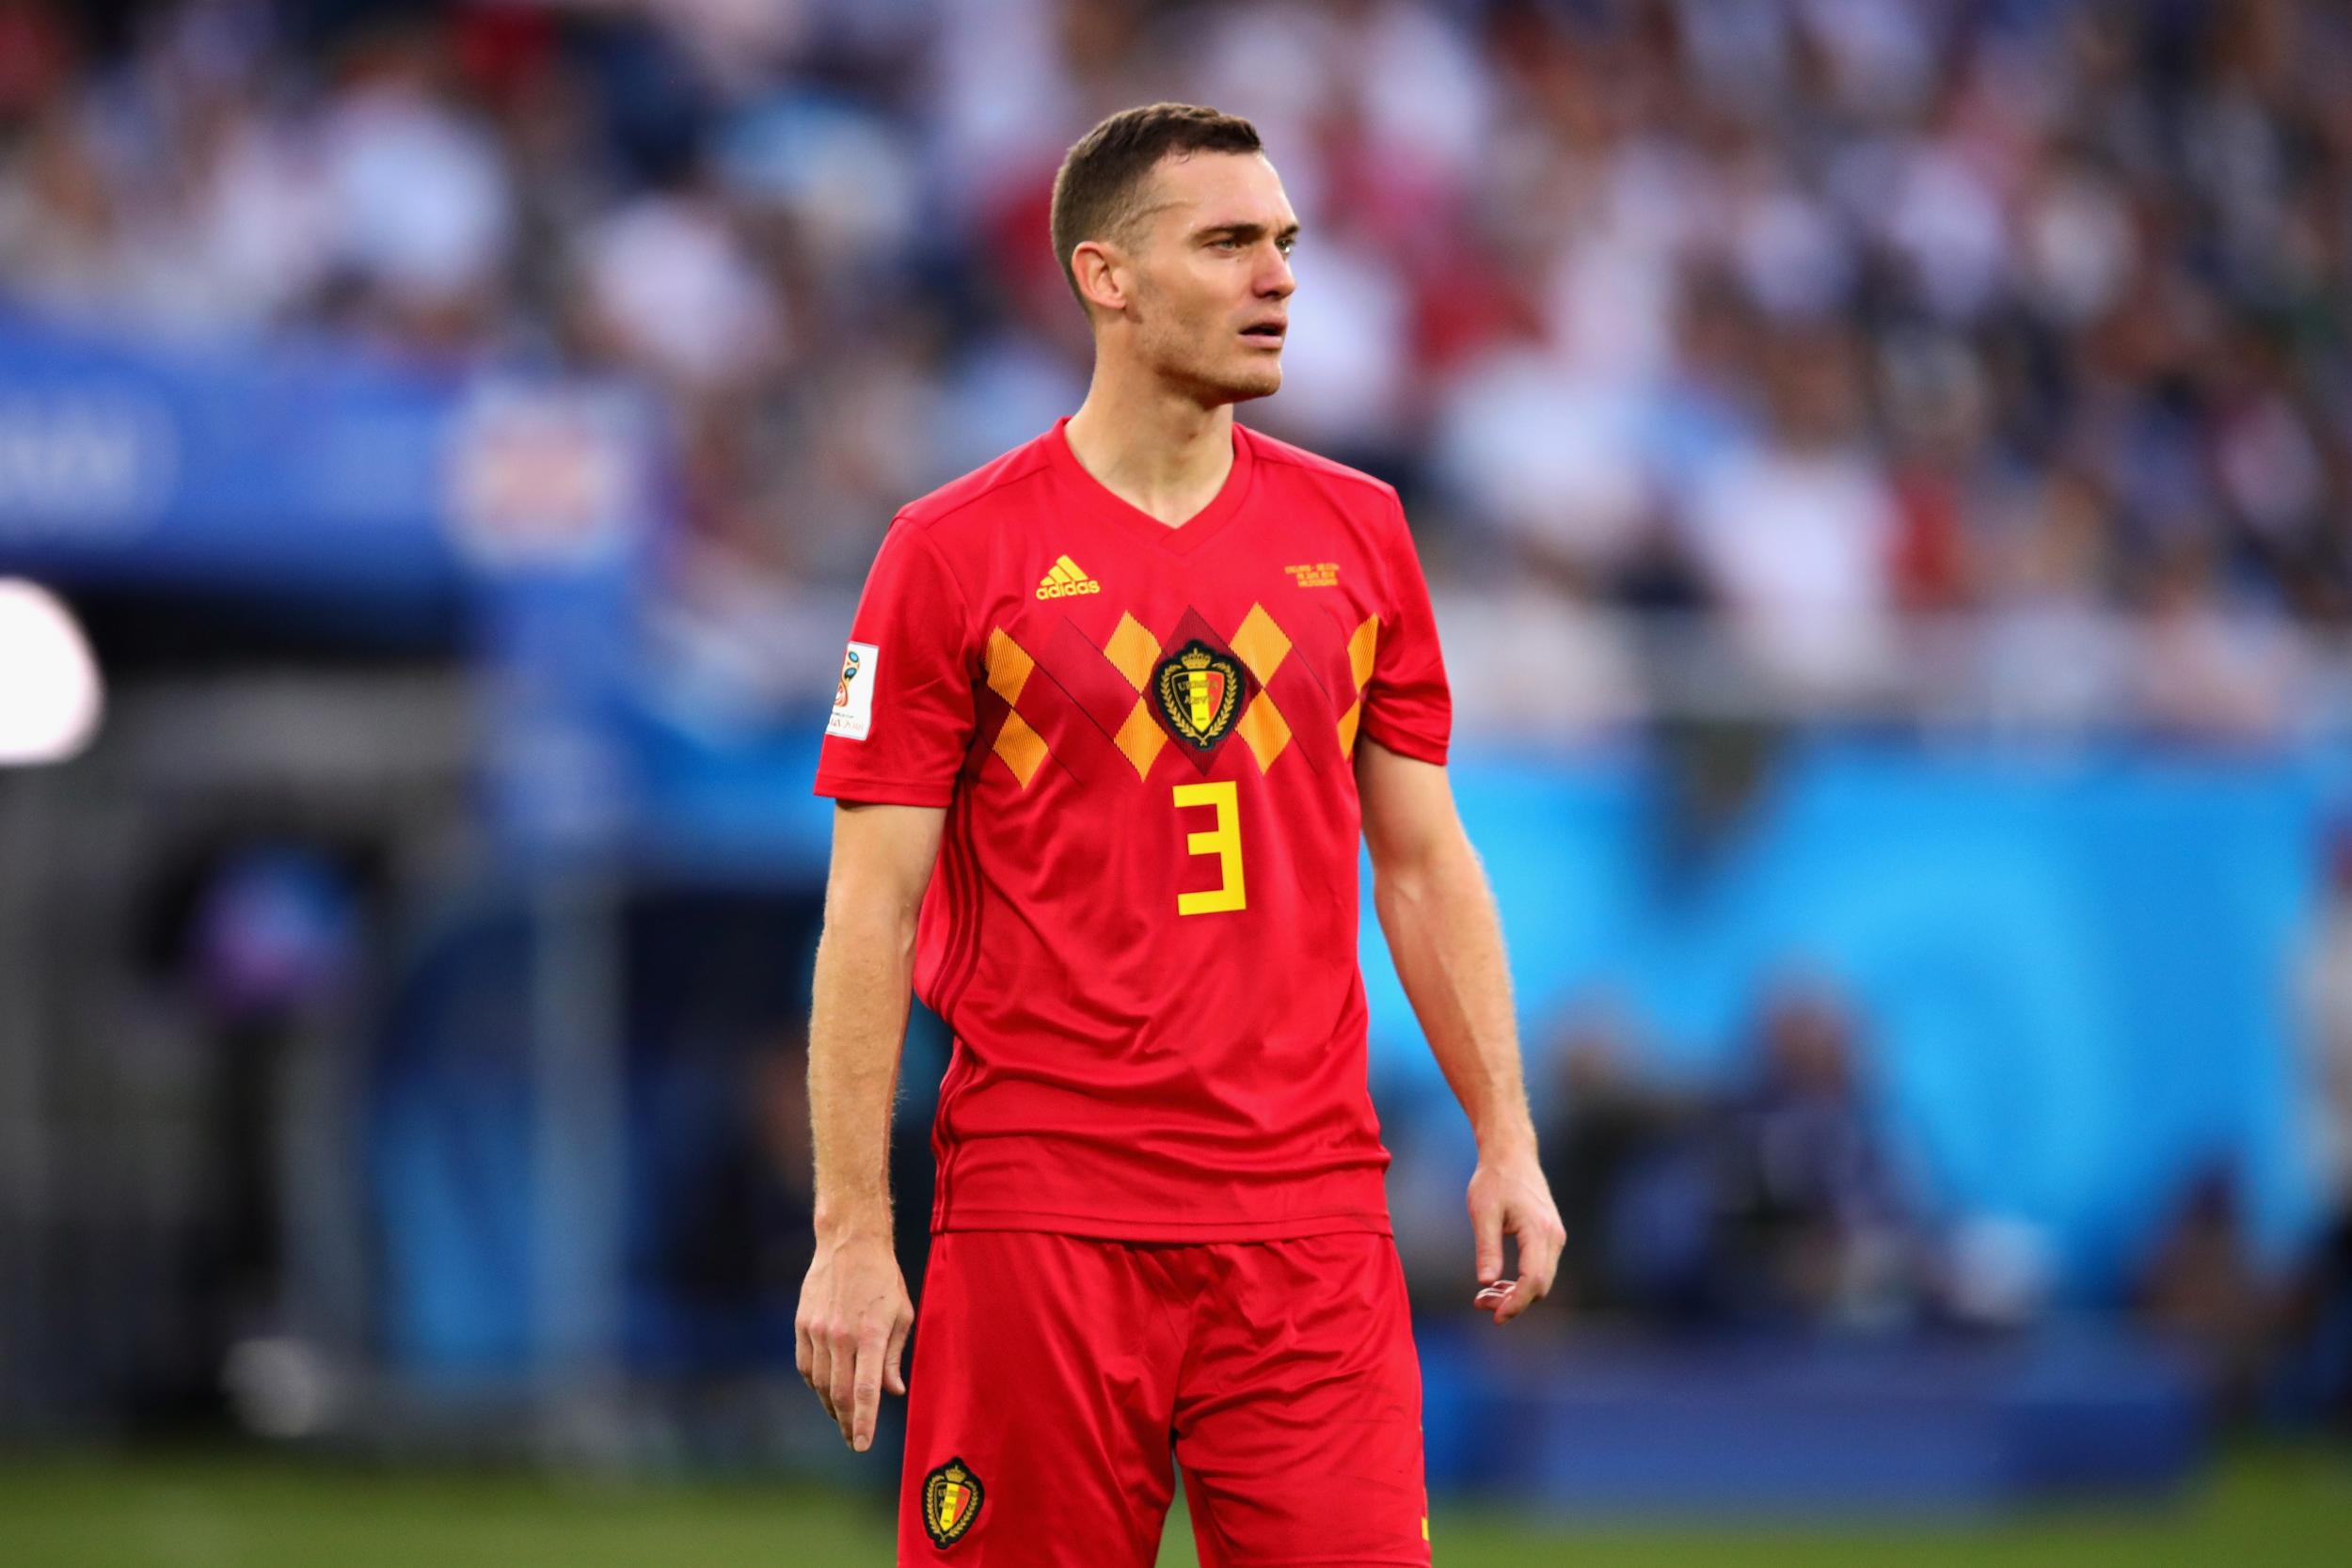 Belgium are out to show there is no easy way to win a World Cup after beating England to top Group G